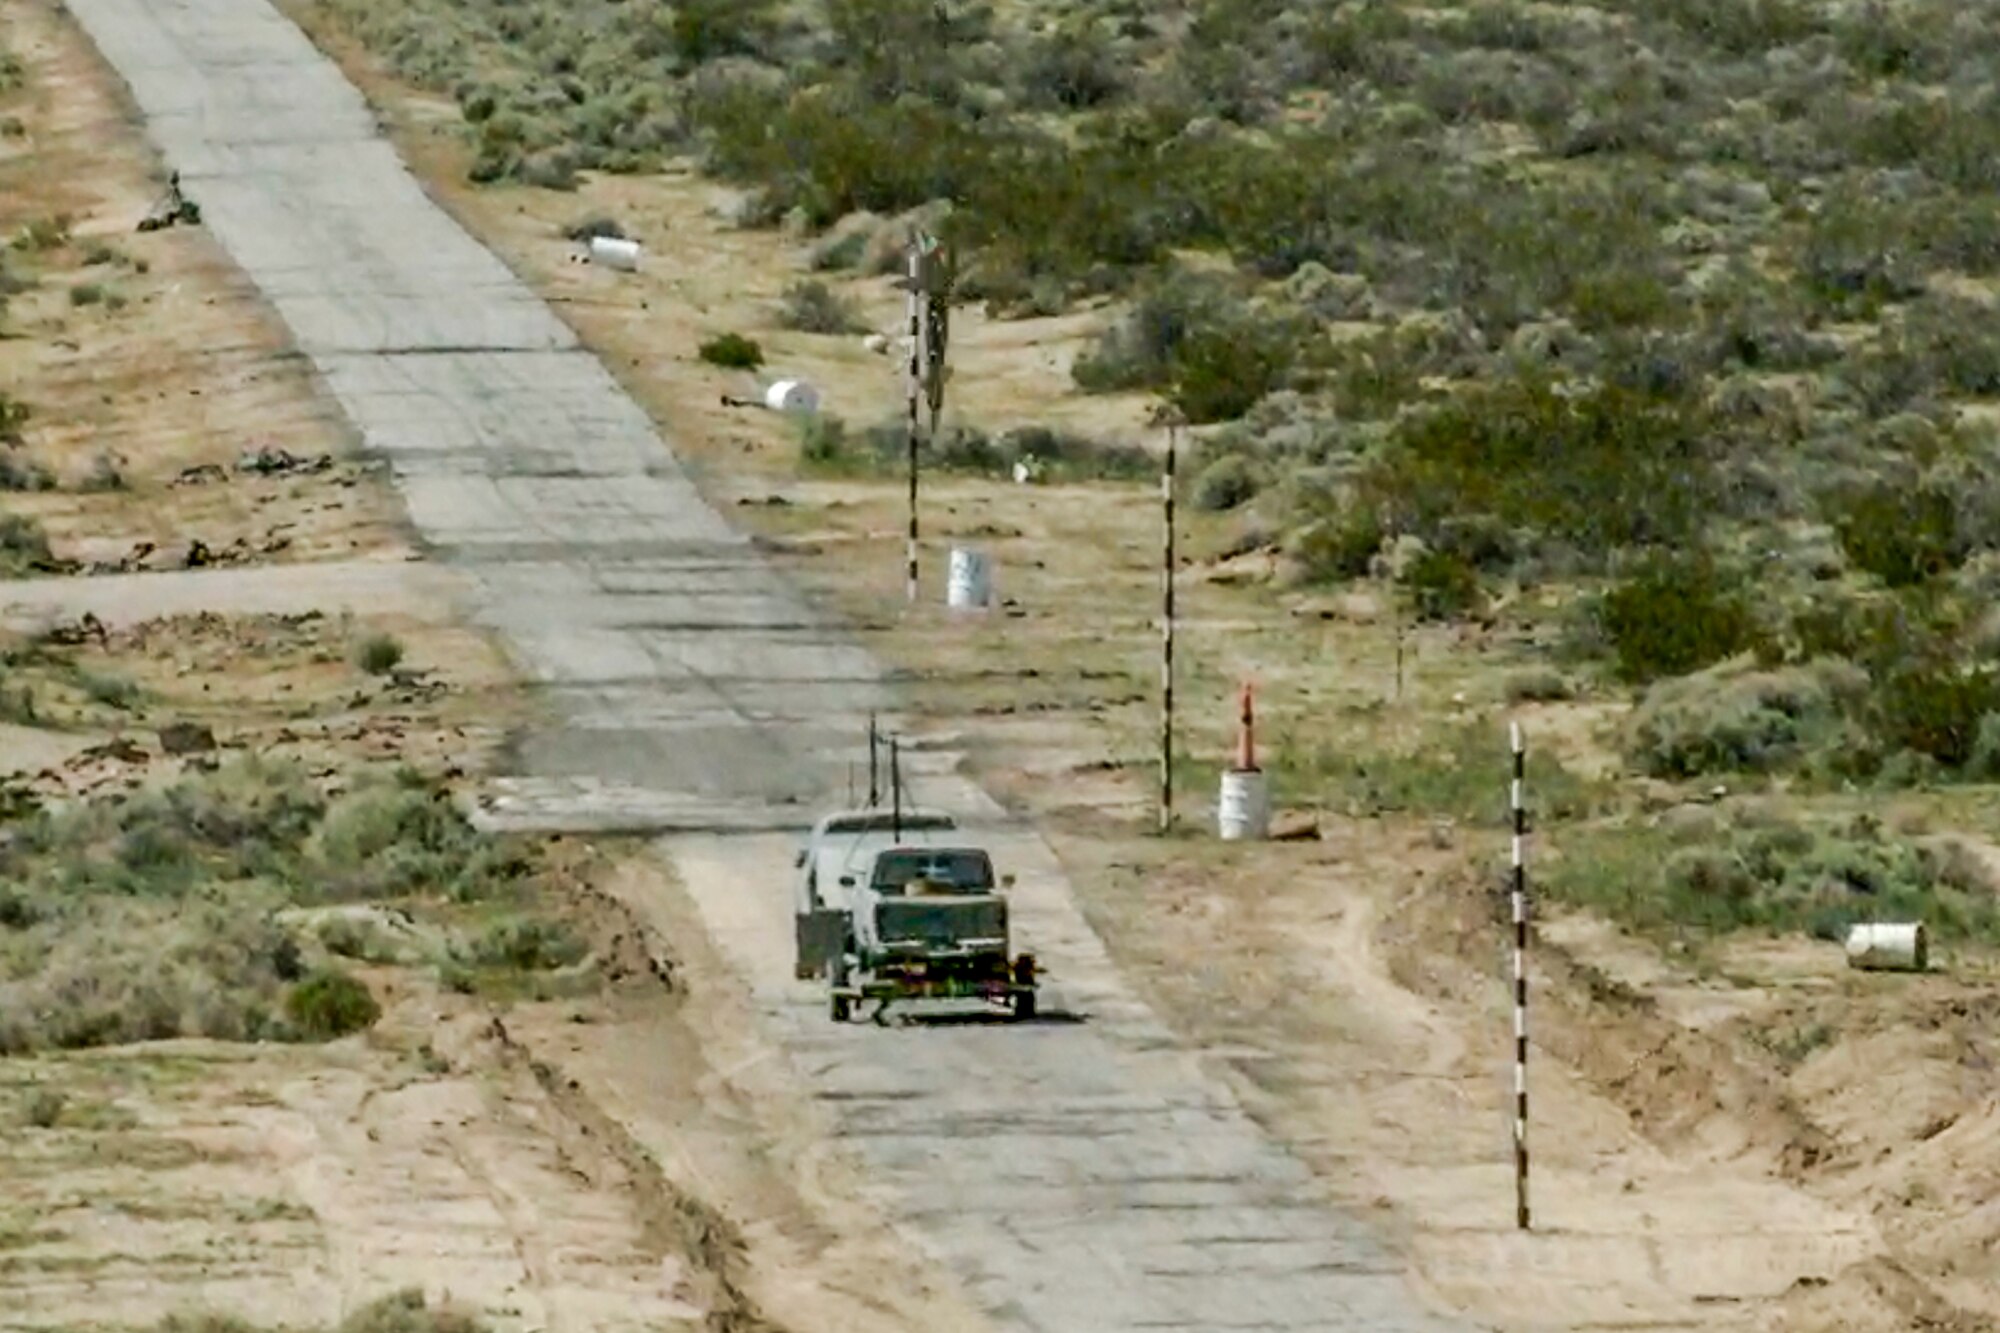 A GBU-12 Paveway II guided bomb is about to strike a computer-driven small pickup truck during a test at Naval Air Weapons Station China Lake, California. The inert bomb was dropped from an Edwards F-35C. (Image courtesy of Lockheed Martin)